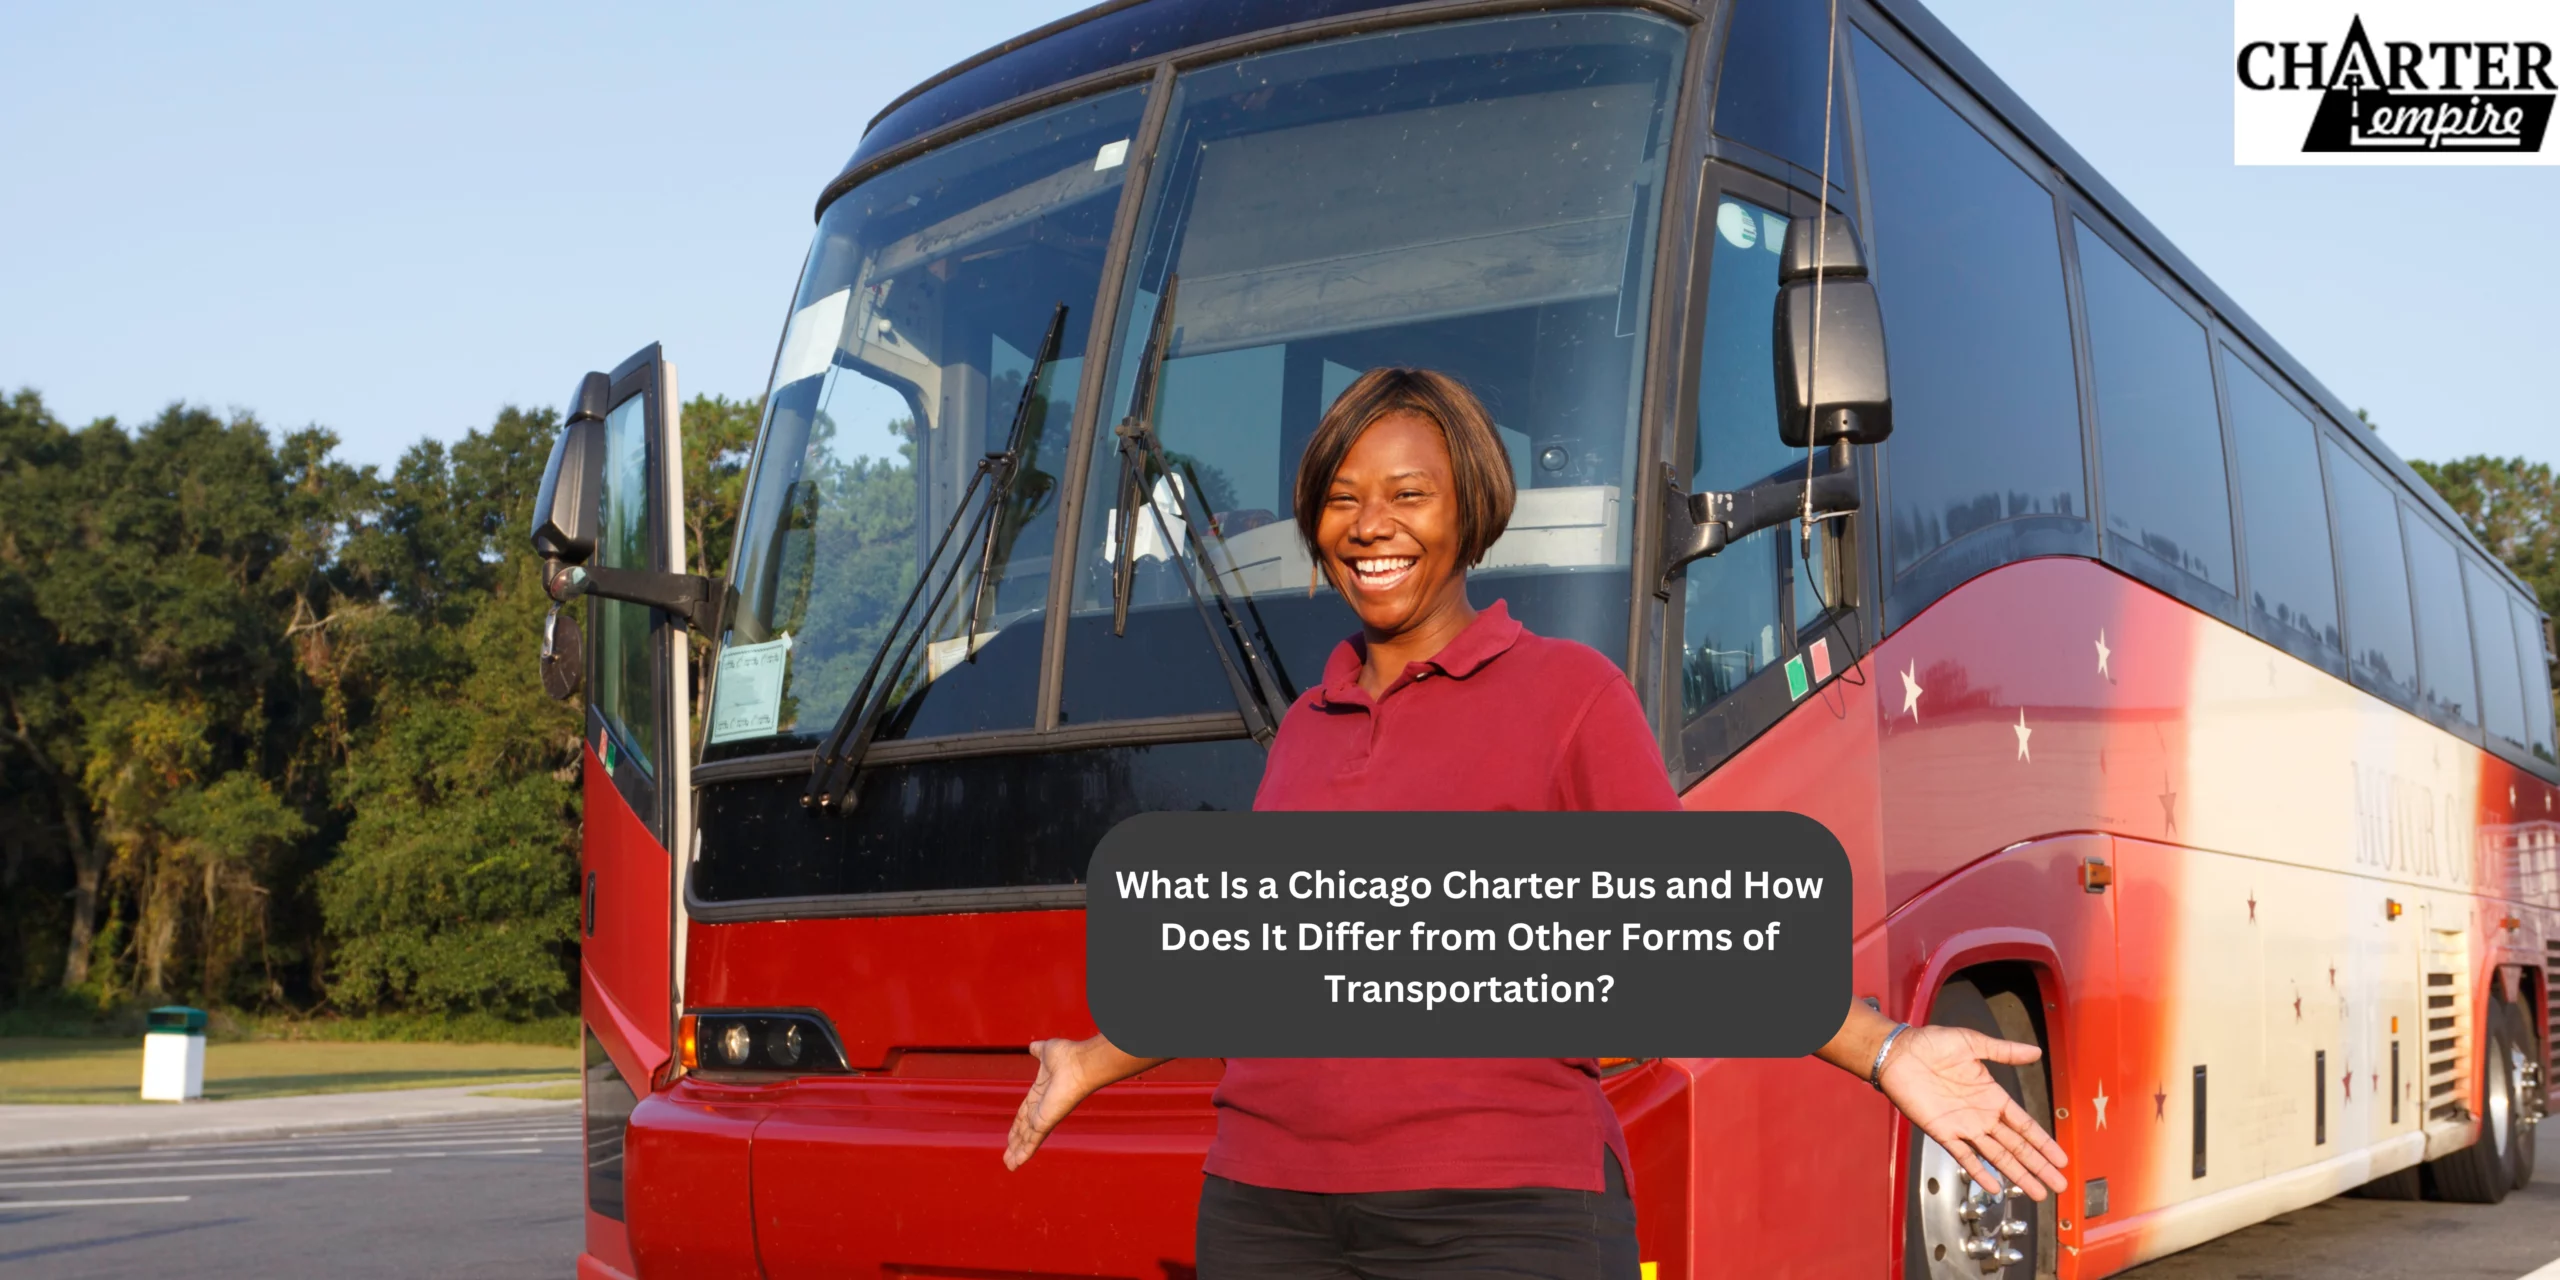 Chicago charter bus, next to charter empire driver